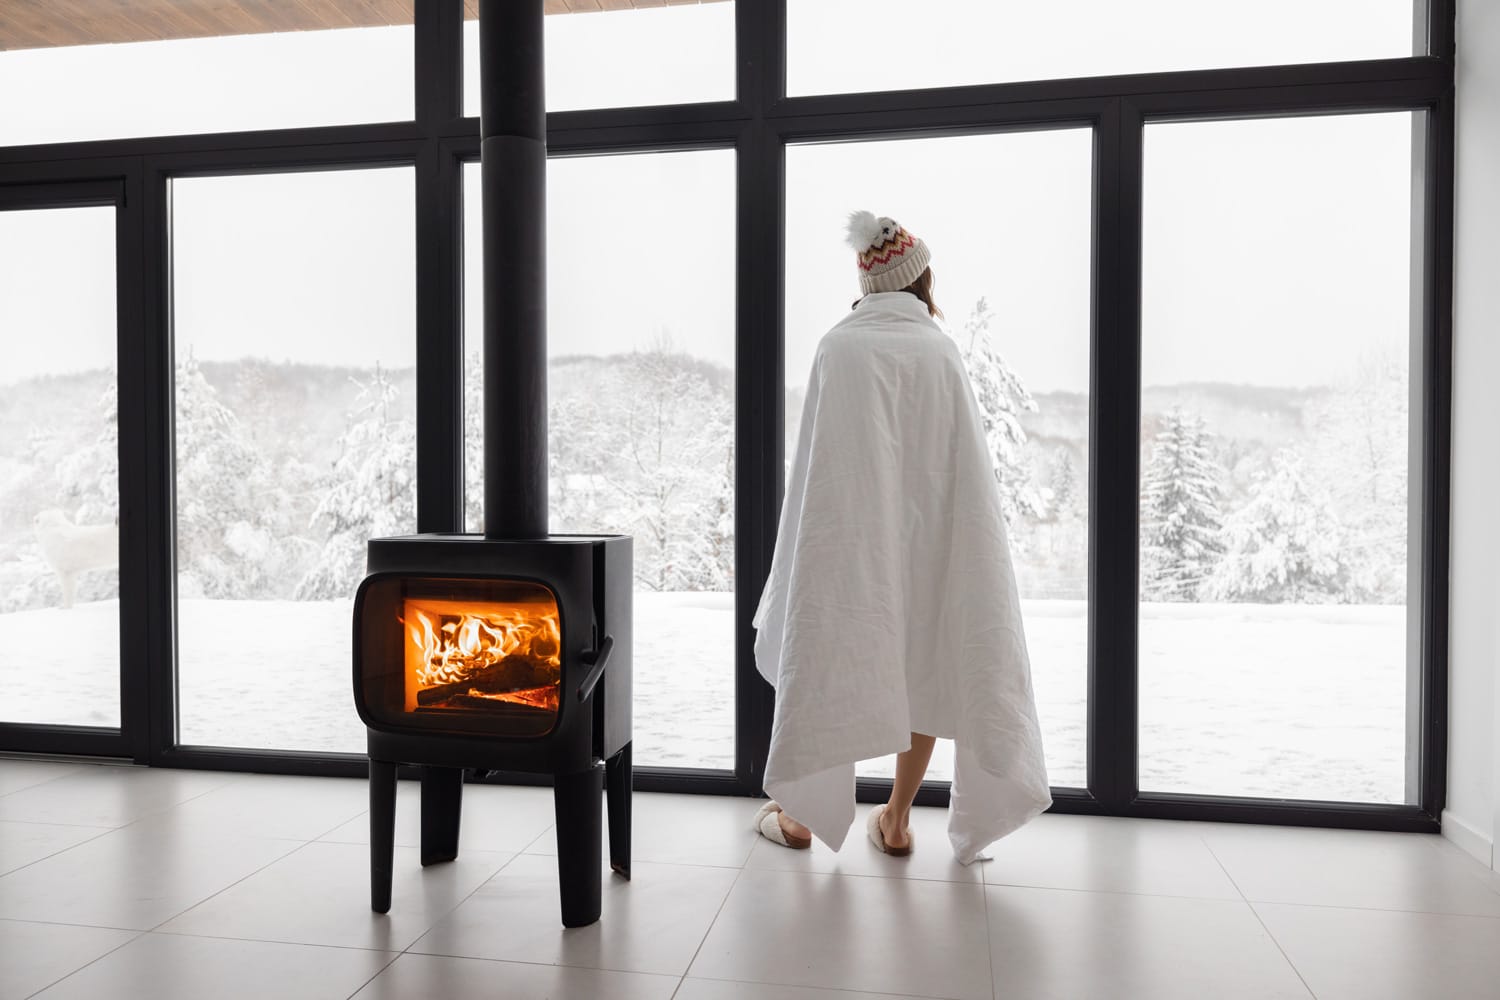 Woman enjoys winter time at home with burning fireplace and panoramic window, looking outside on snowy landscape. Concept of winter mood and comfort at home. Idea of winter vacation in the mountains